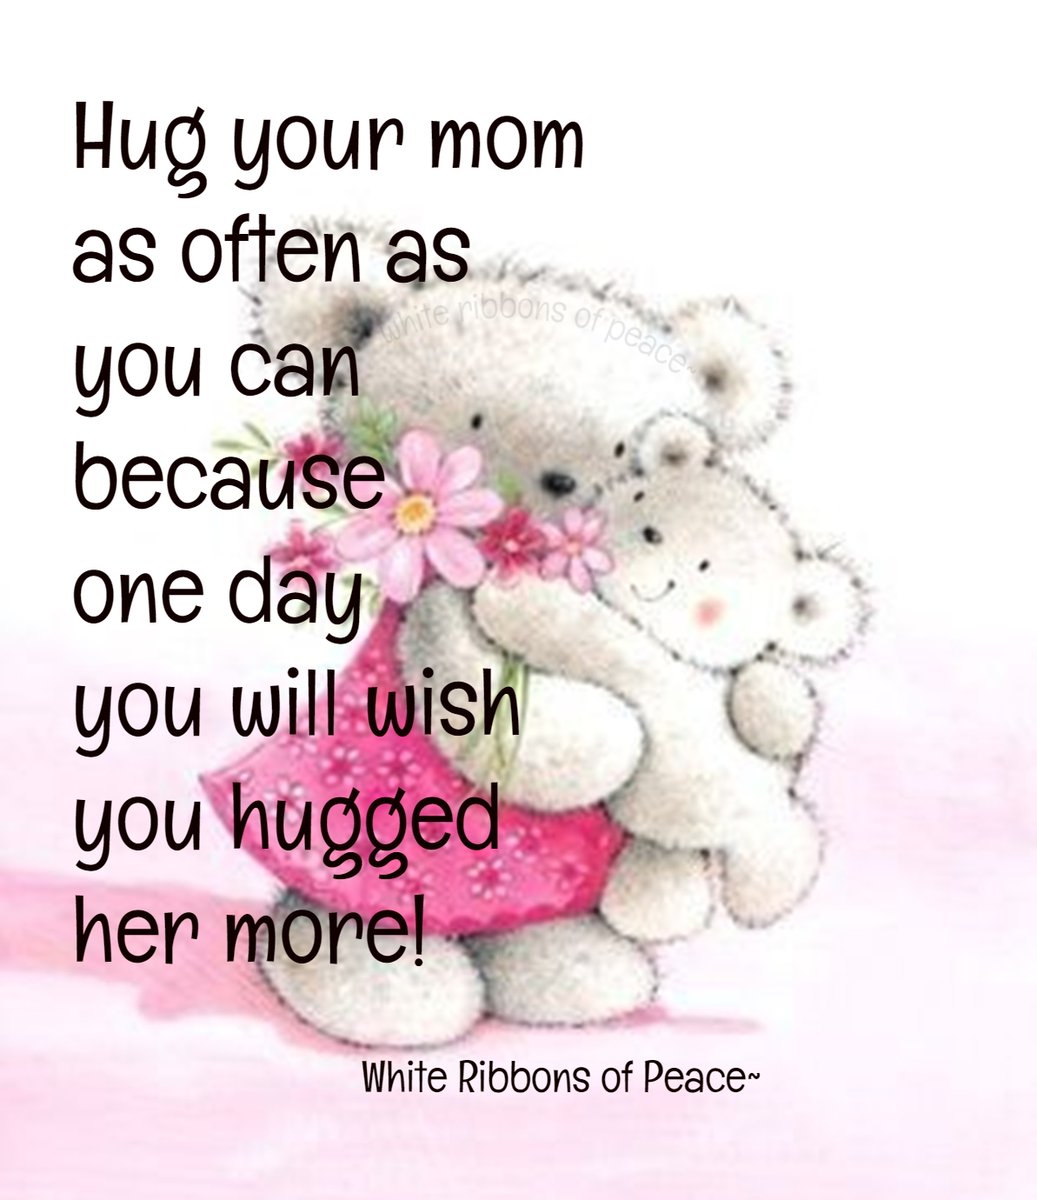 Hug your mom as often as you can because one day you will wish you hugged her more! 🌸 ~ Oh, so true! ~ #Moms